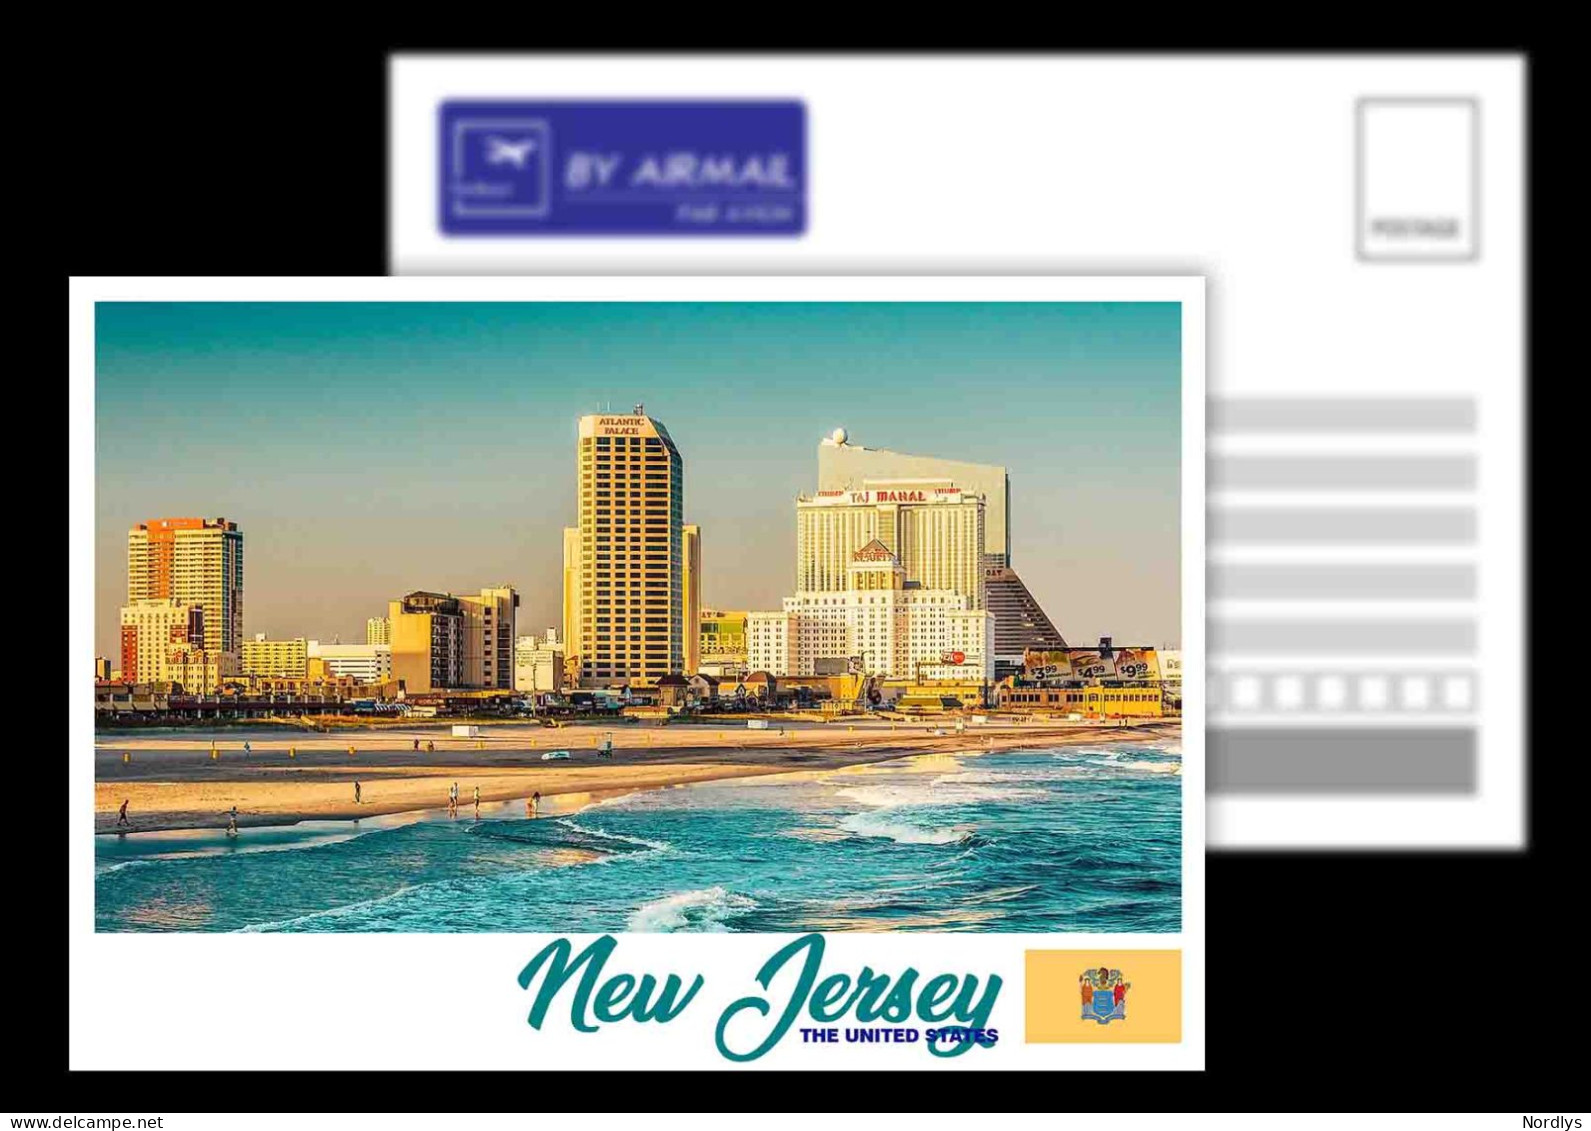 New Jersey / US States / View Card - Atlantic City